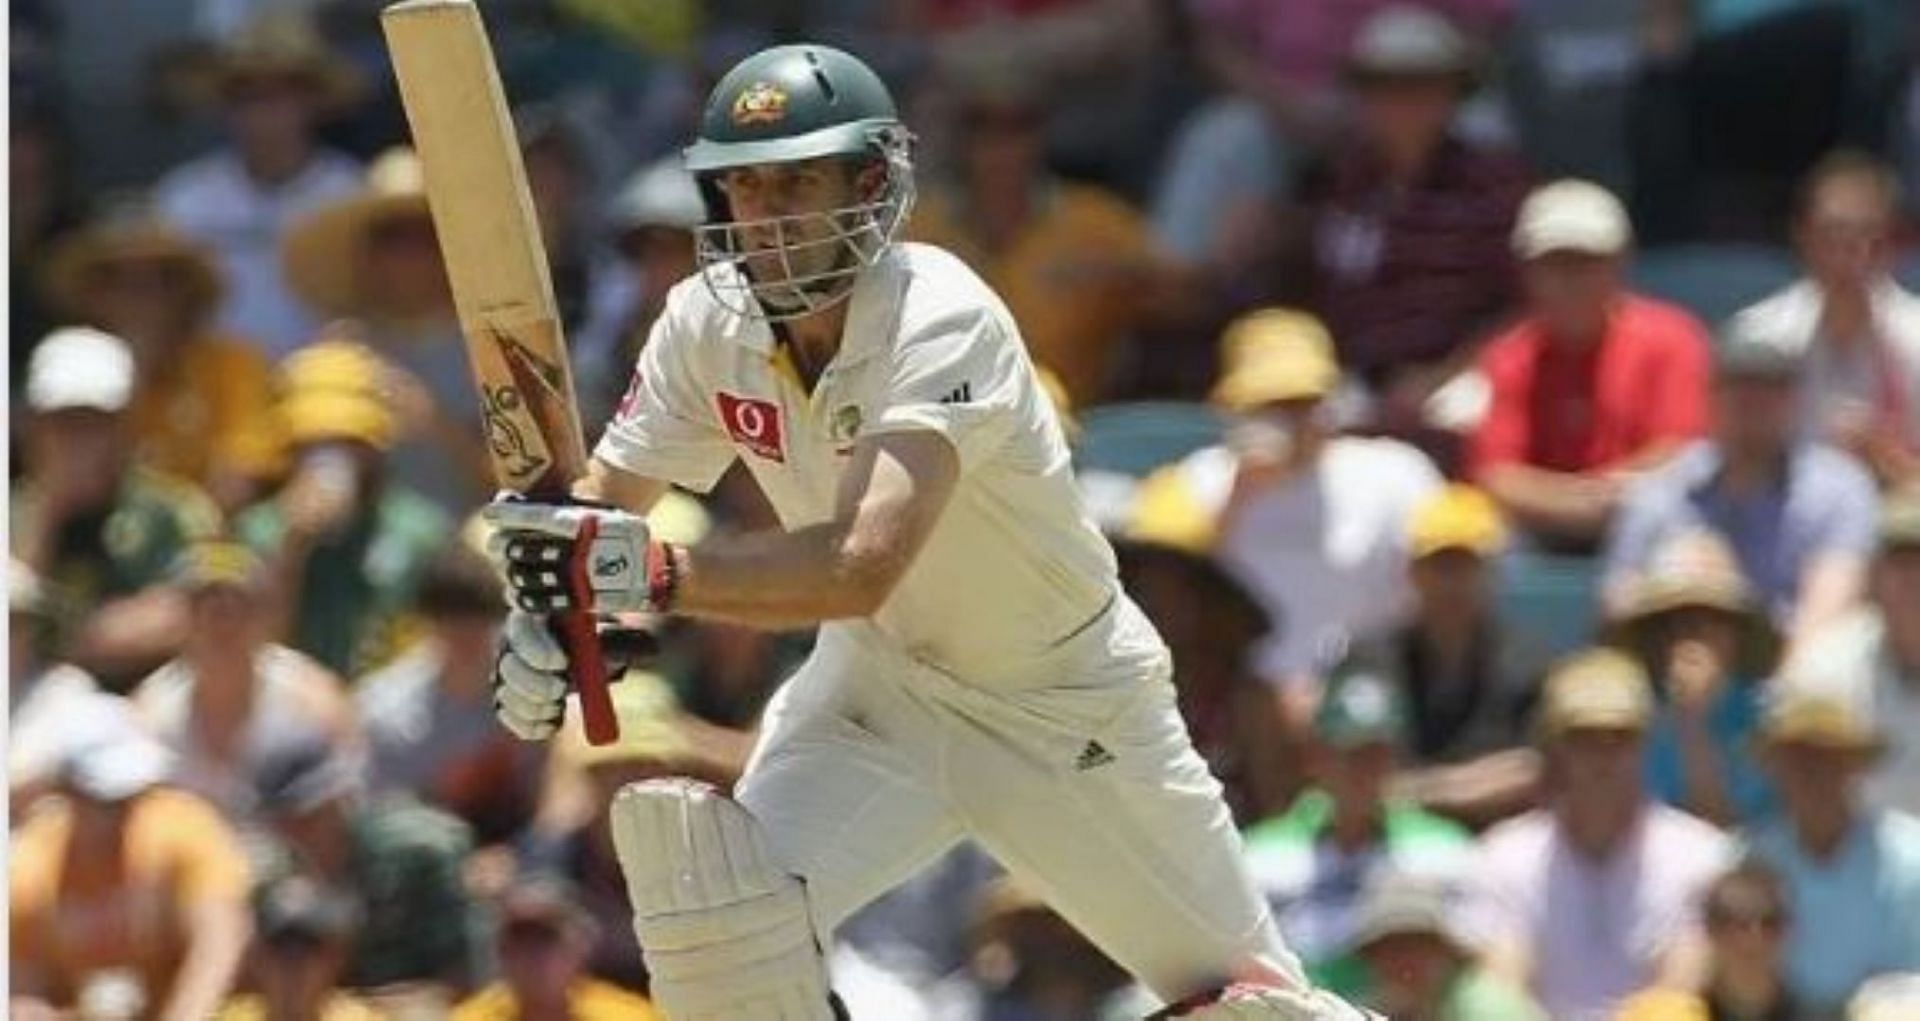 Katich was among the most unheralded Australian batters during his playing days